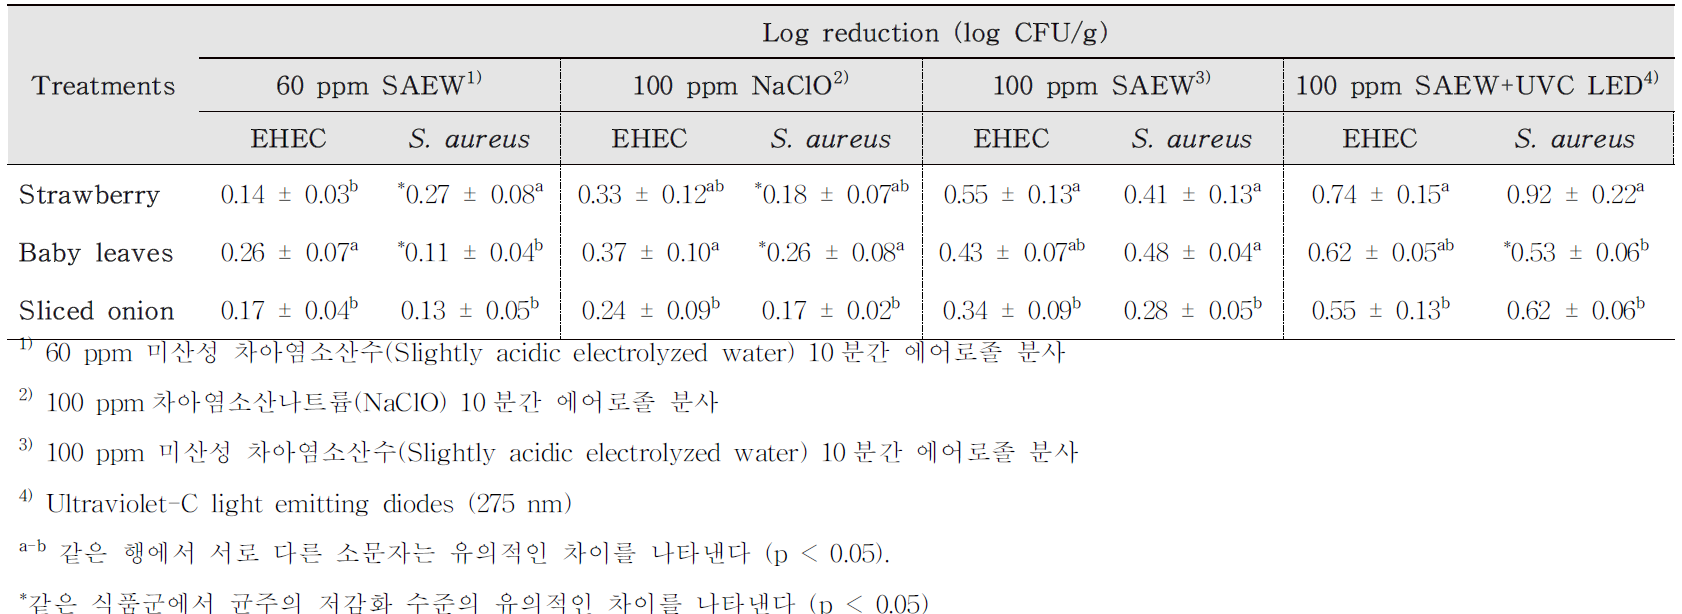 Reduction population of EHEC and S. aureus in soft-fresh produces by disinfection treatments